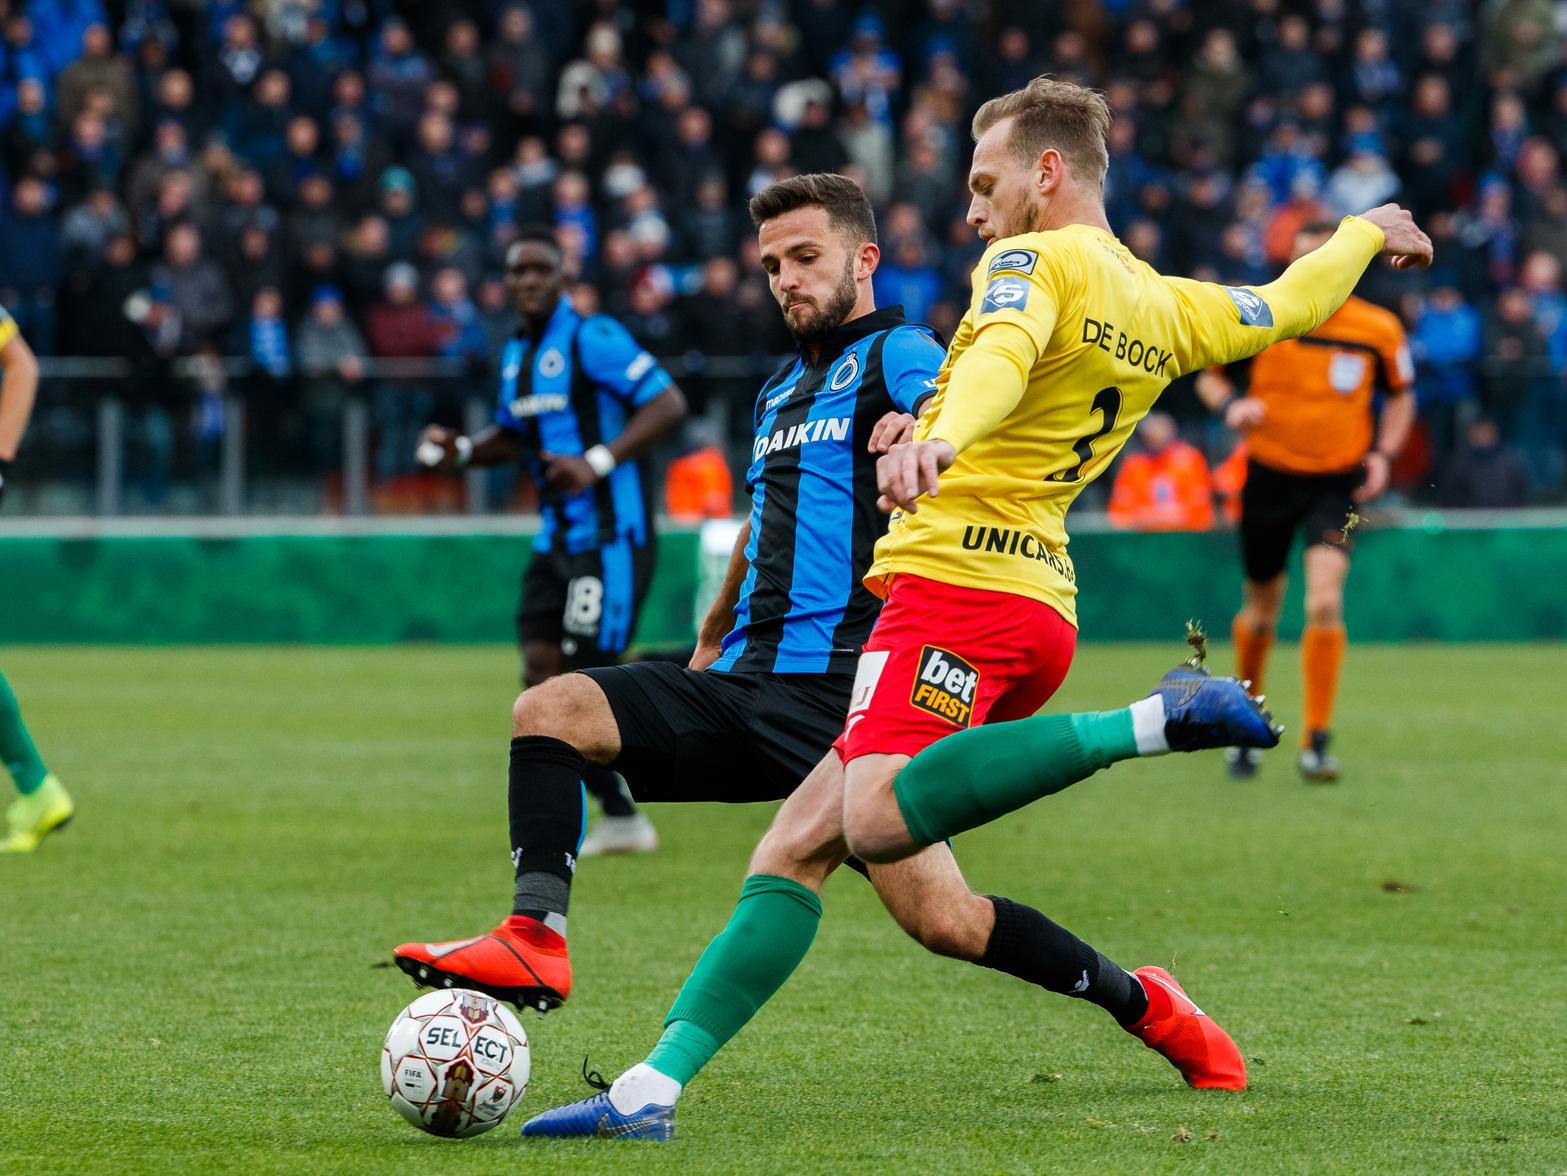 It's not really worked out for the former Belgium U21 international at Elland Road, who spent his second season on loan at Oostende, and is now on another temporary spell, this time with Sunderland.